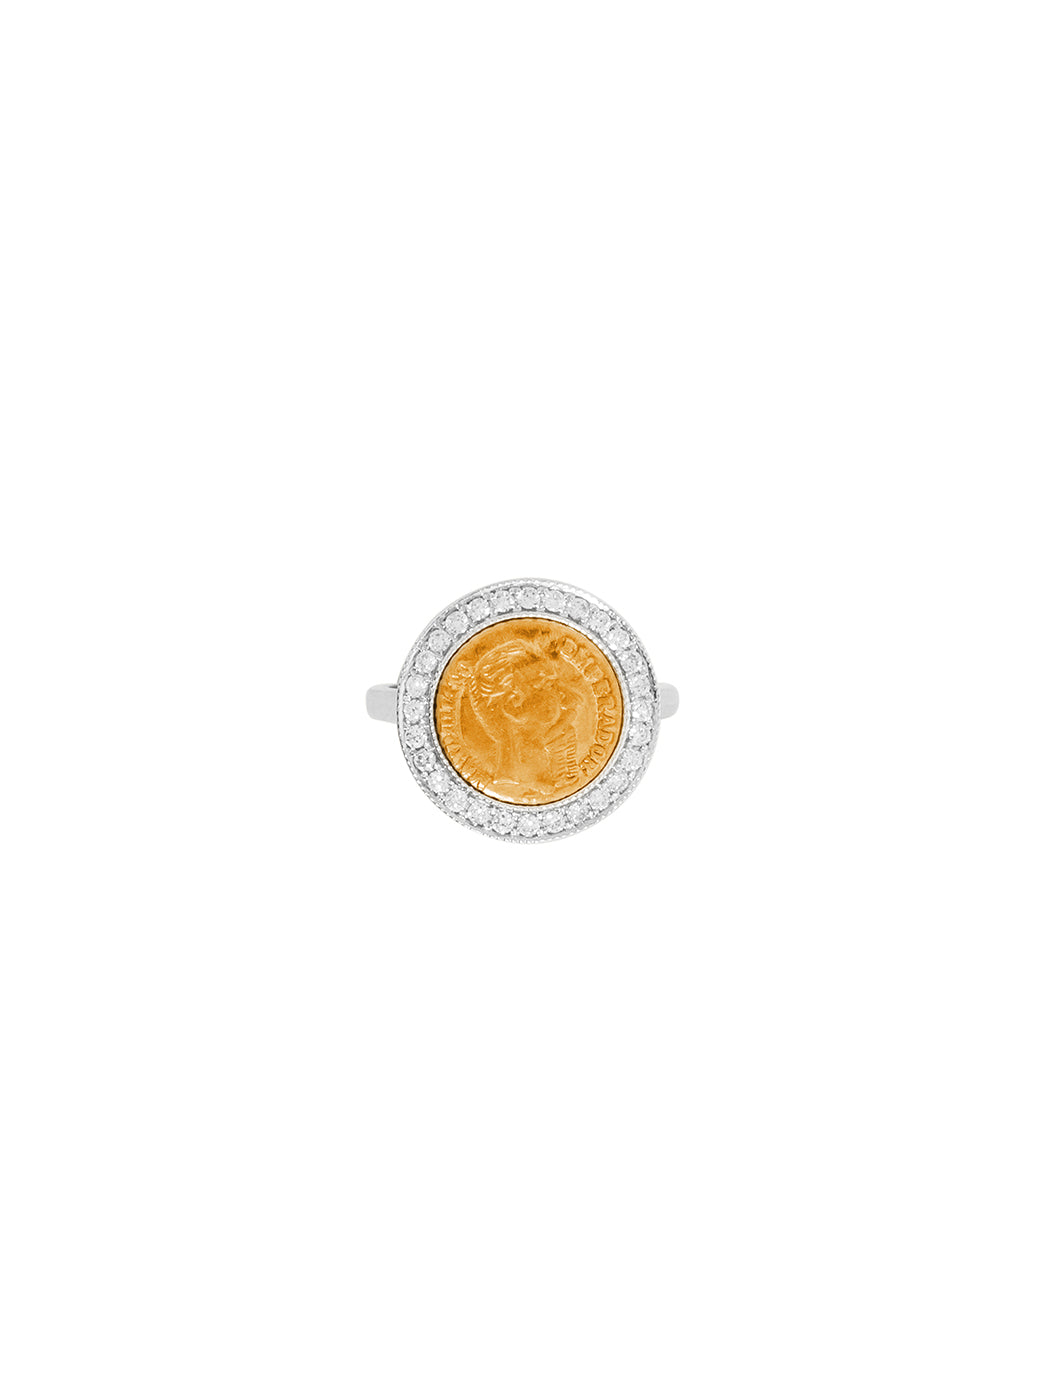 Fiorina Jewellery Gold Button Pinkie Ring